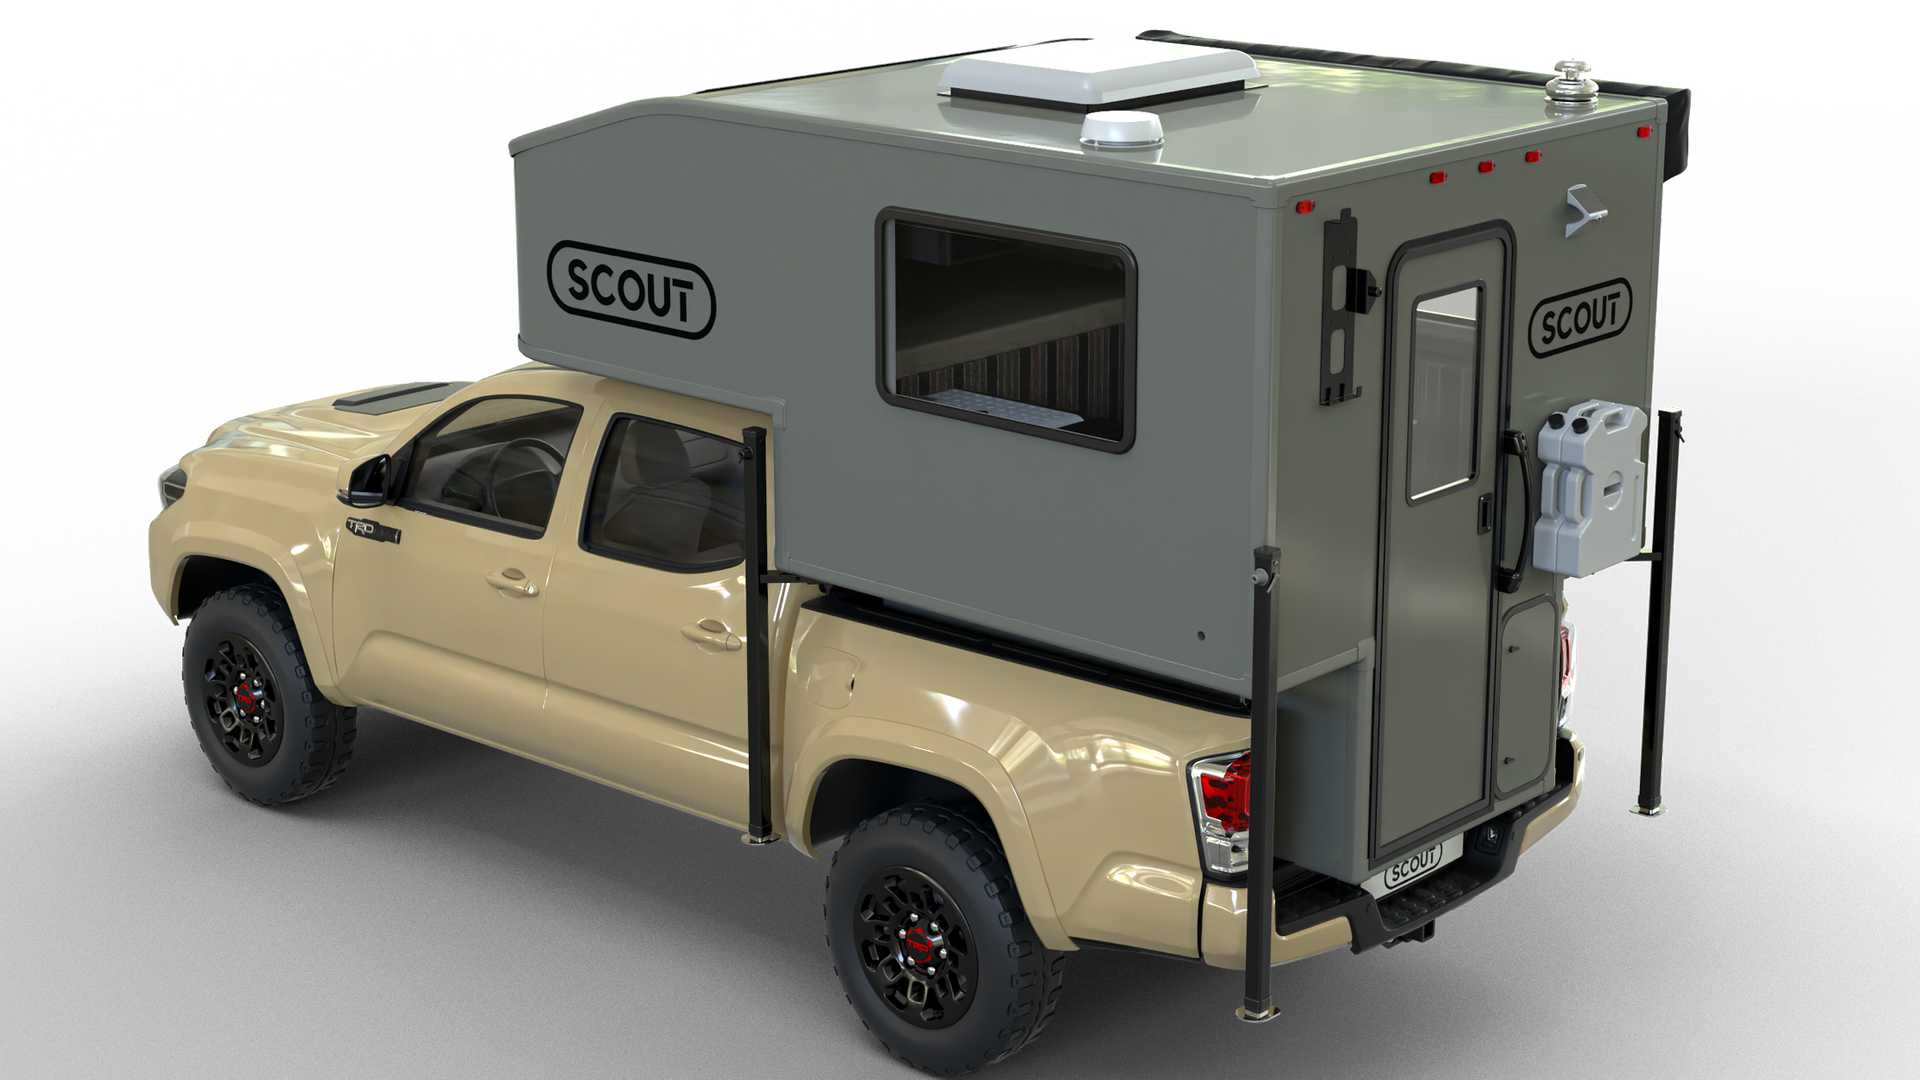 Scout Yoho is a lighter-weight camper for midsize pickups - Autoblog